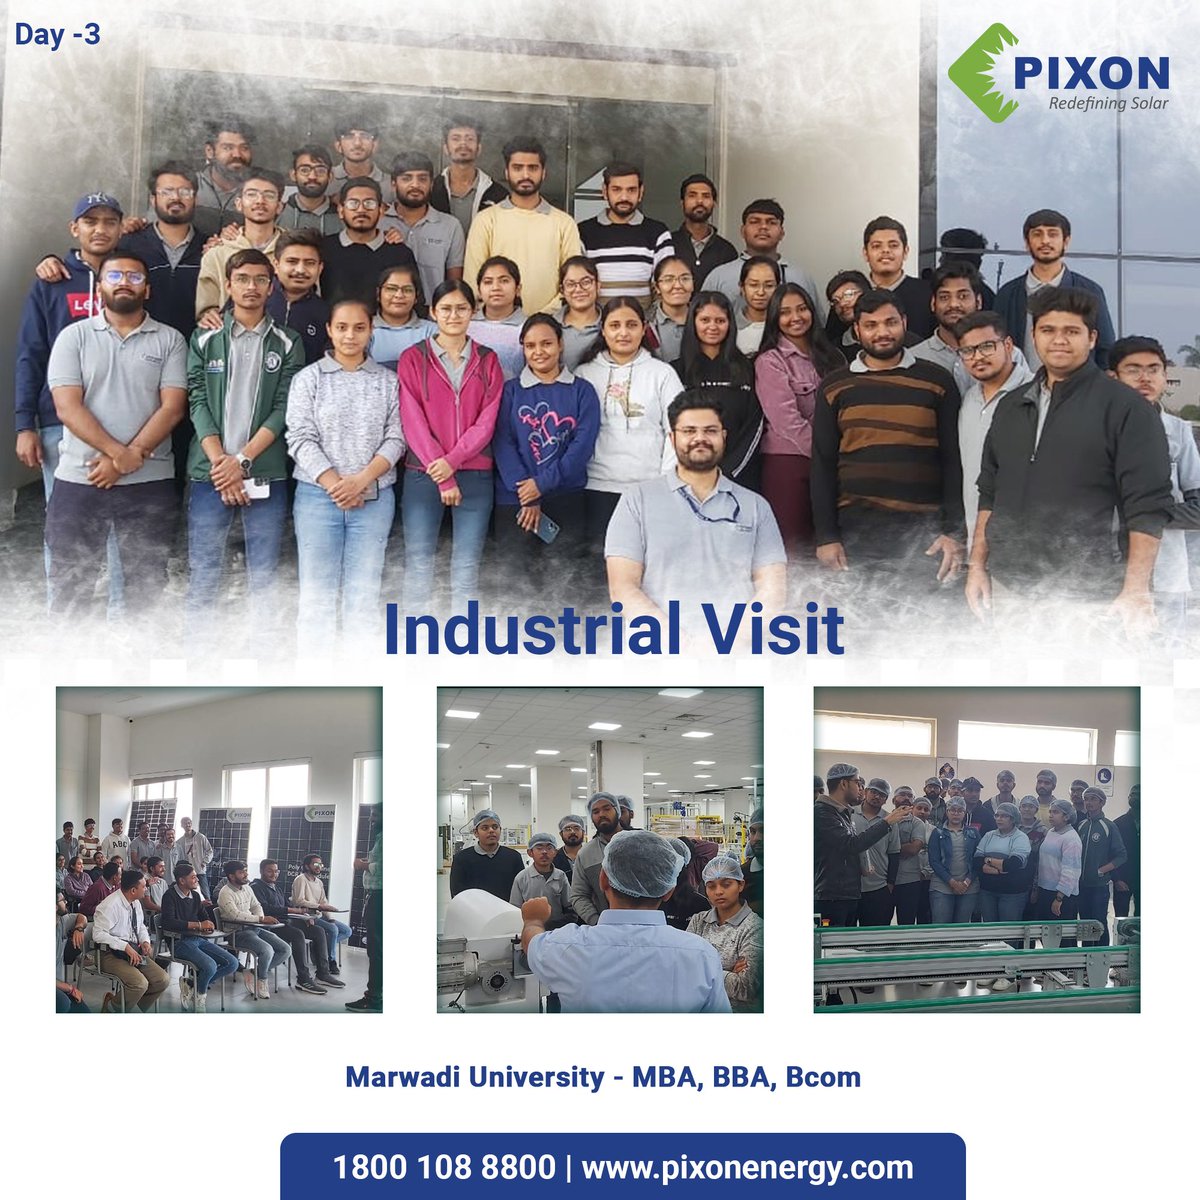 @MU_Rajkot University students stepped into the future at the PIXON factory premises. Witnessing first-hand the marvels of technology and manufacturing.

#industrialvisit #pixon #automation #solarpower #solarenergy #modulemanufacturer #renewableenergy #solarpanels #solarcompany